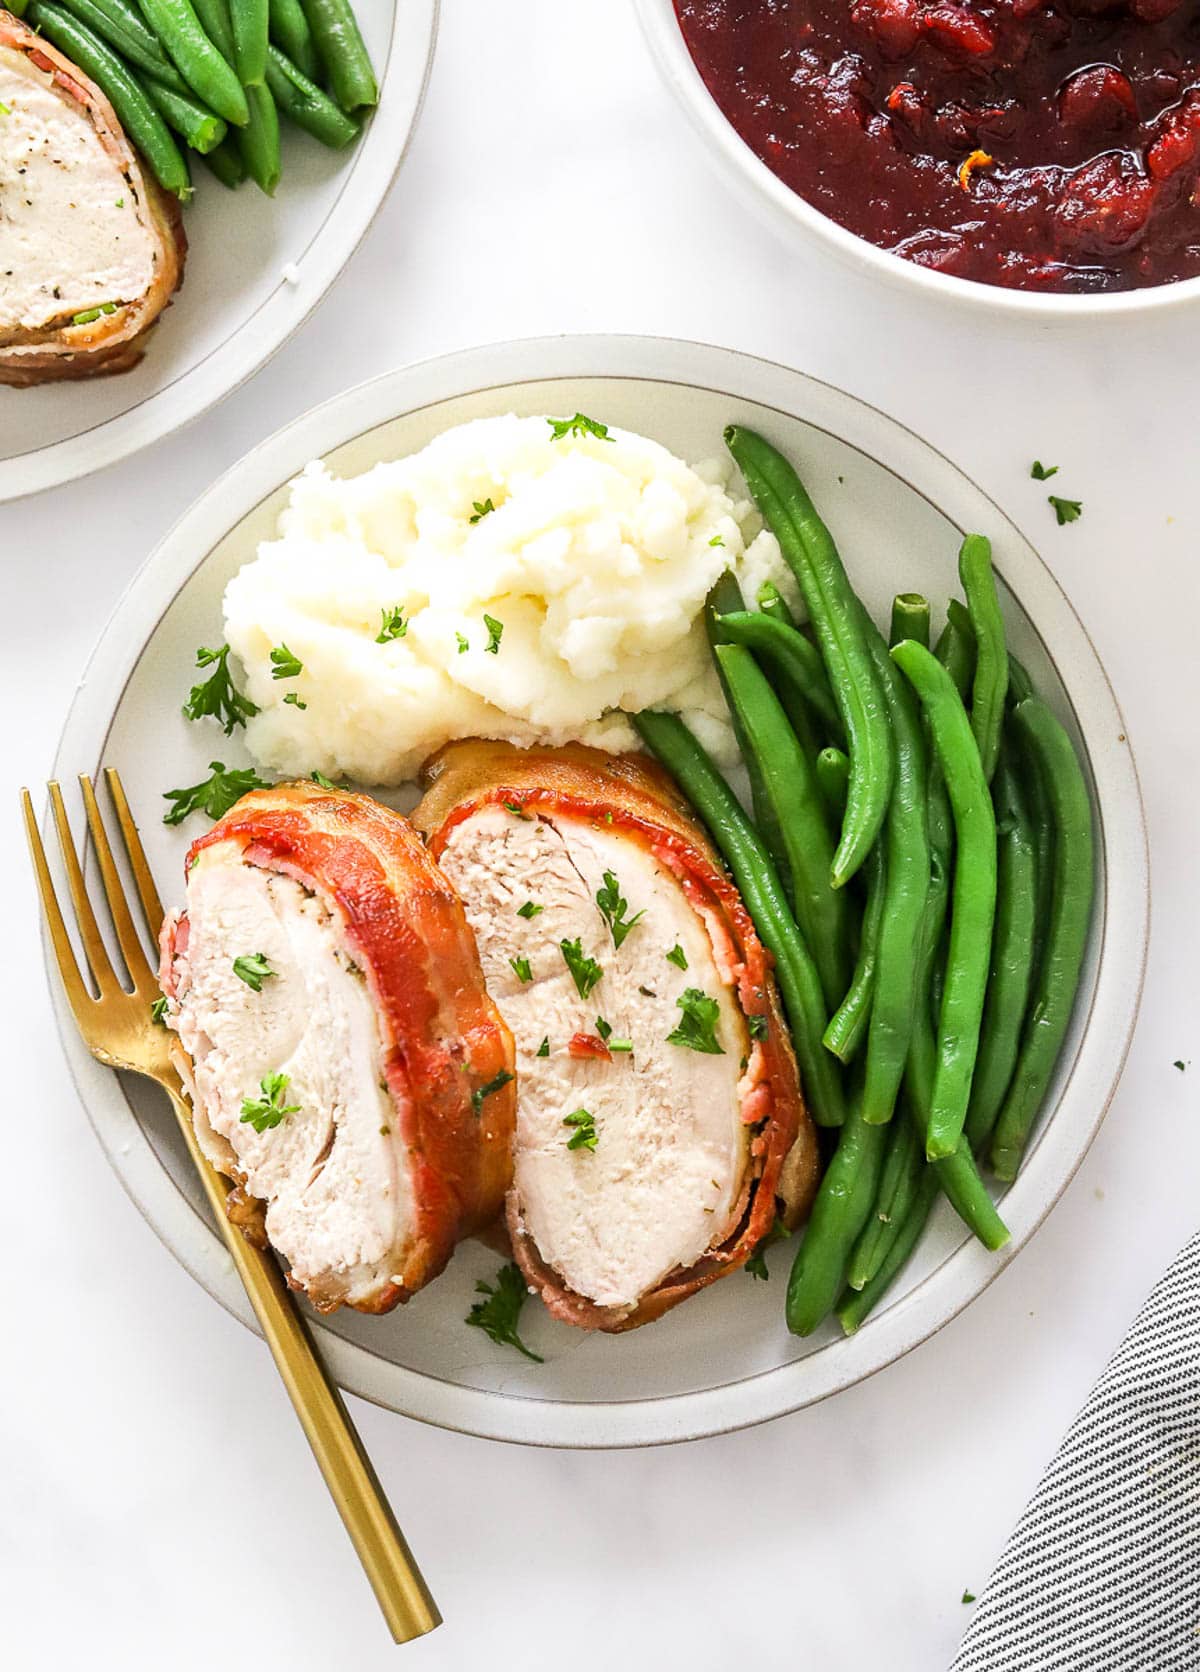 A plate with sliced turkey breast, mashed potatoes and green beans. Cranberry sauce in a bowl.